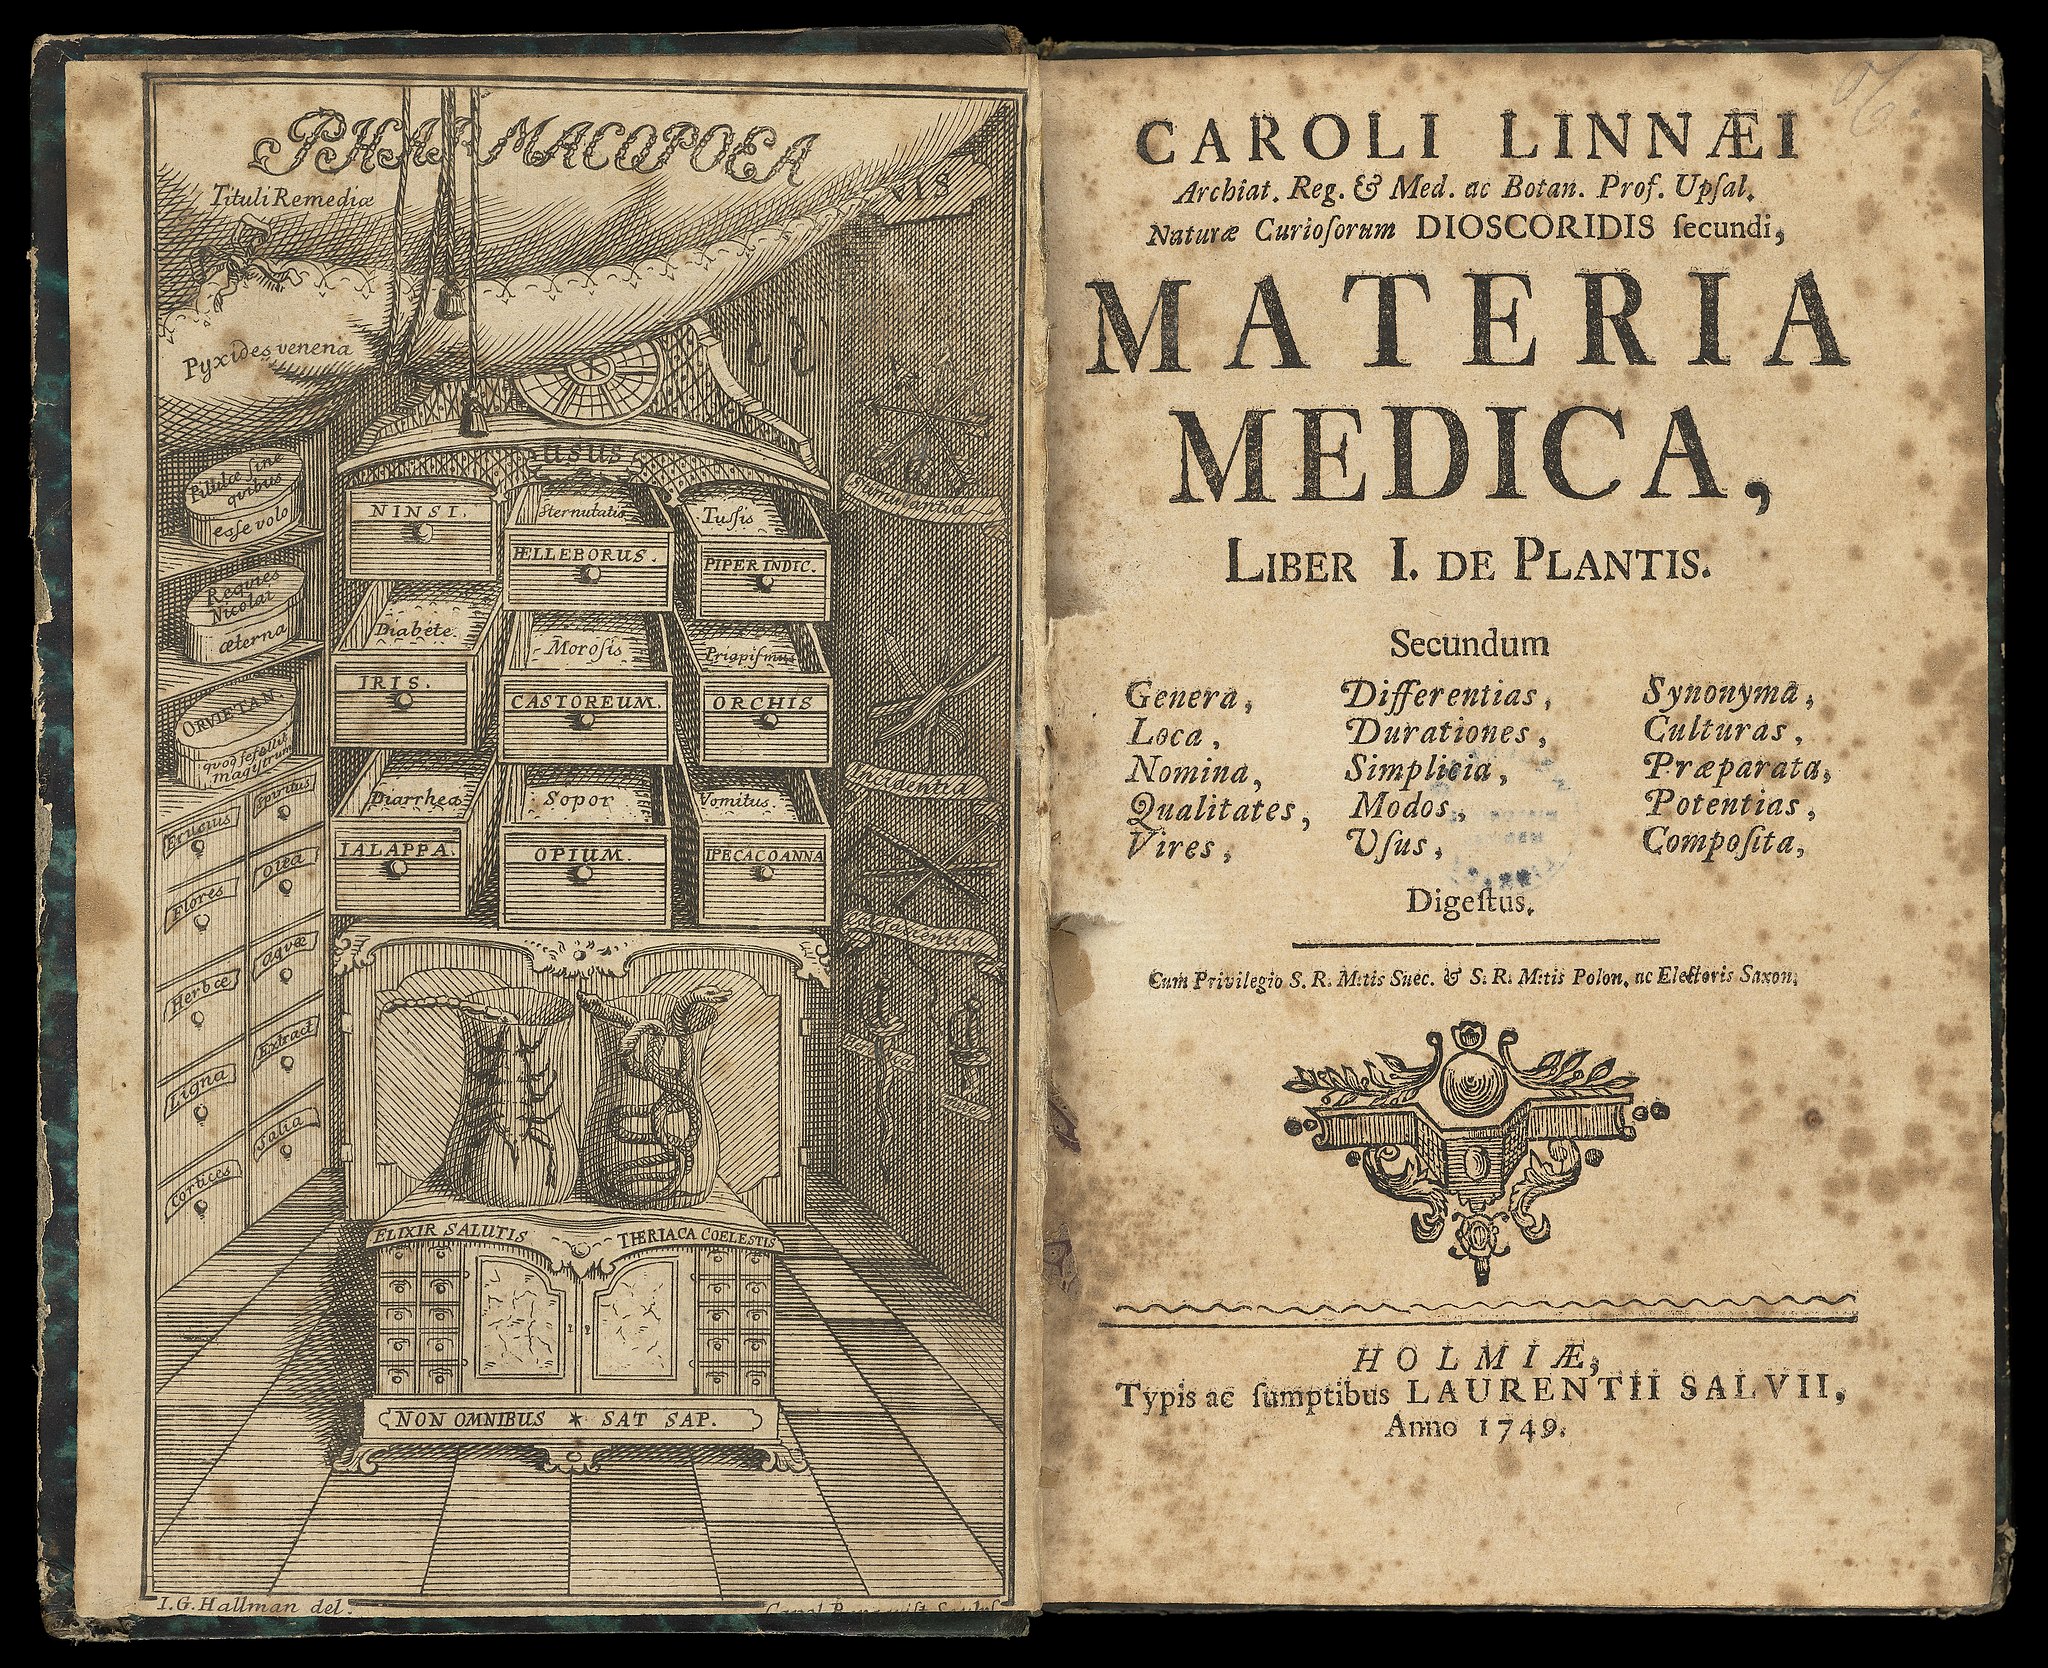 Title page to 'Materia Medica', with illustration of alchemist drawers on left side